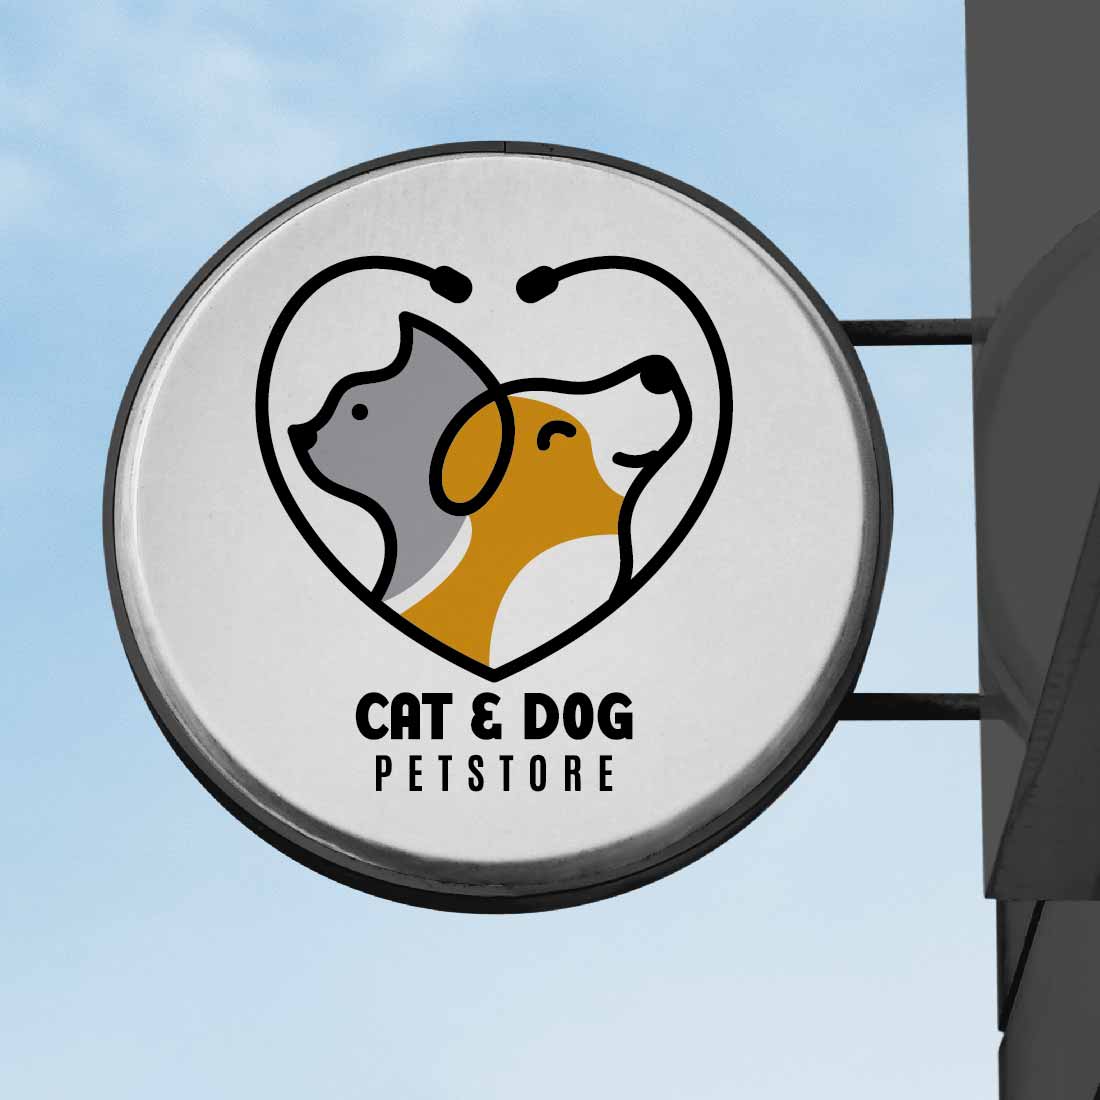 Dog and cat logo for veterinary or petshop preview image.